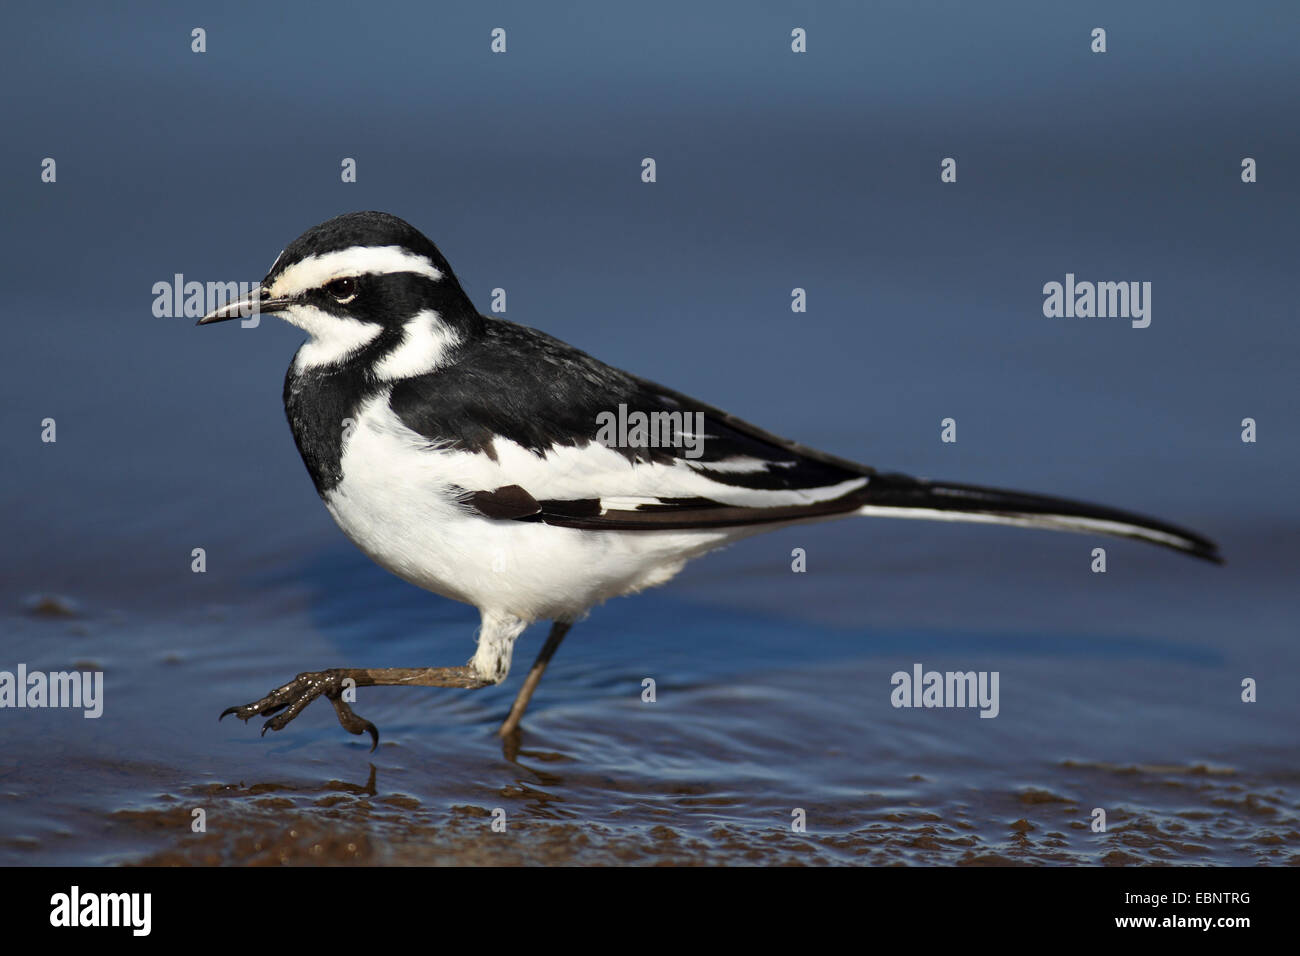 African pied wagtail (Motacilla aguimp), searching food in shallow water, South Africa, Kruger National Park Stock Photo